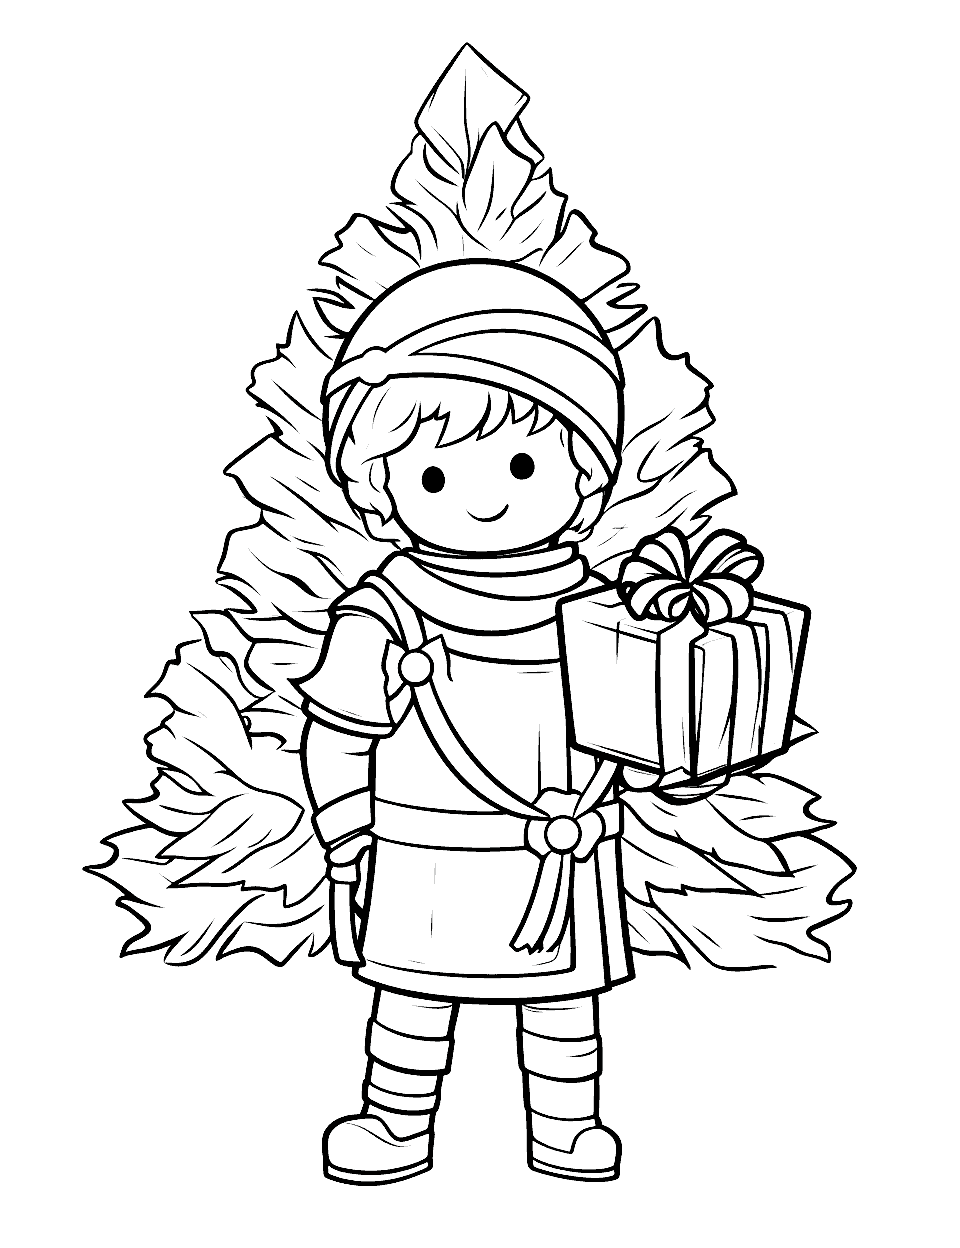 Christmas Knight Coloring Page - A brave knight carrying a Christmas tree to his castle.